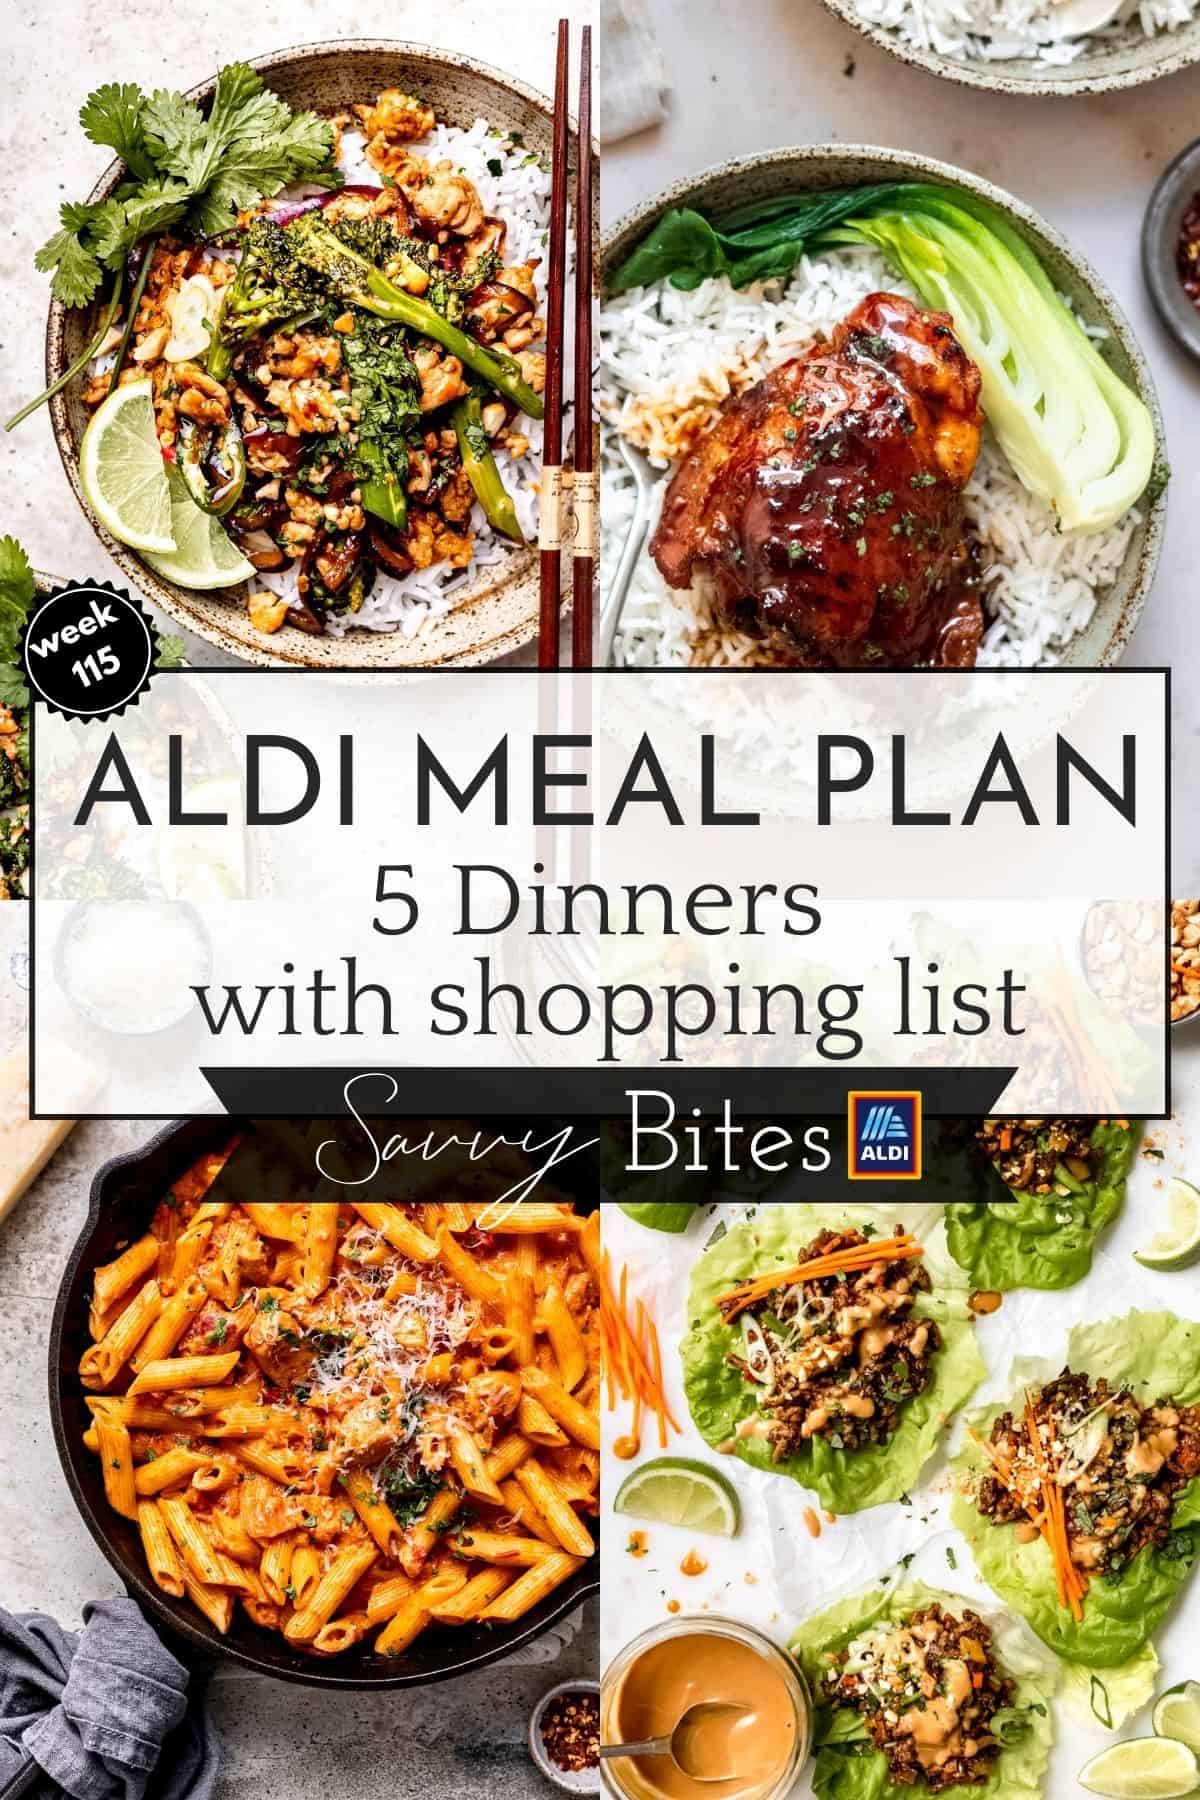 Easy budget meal plan photo collage.